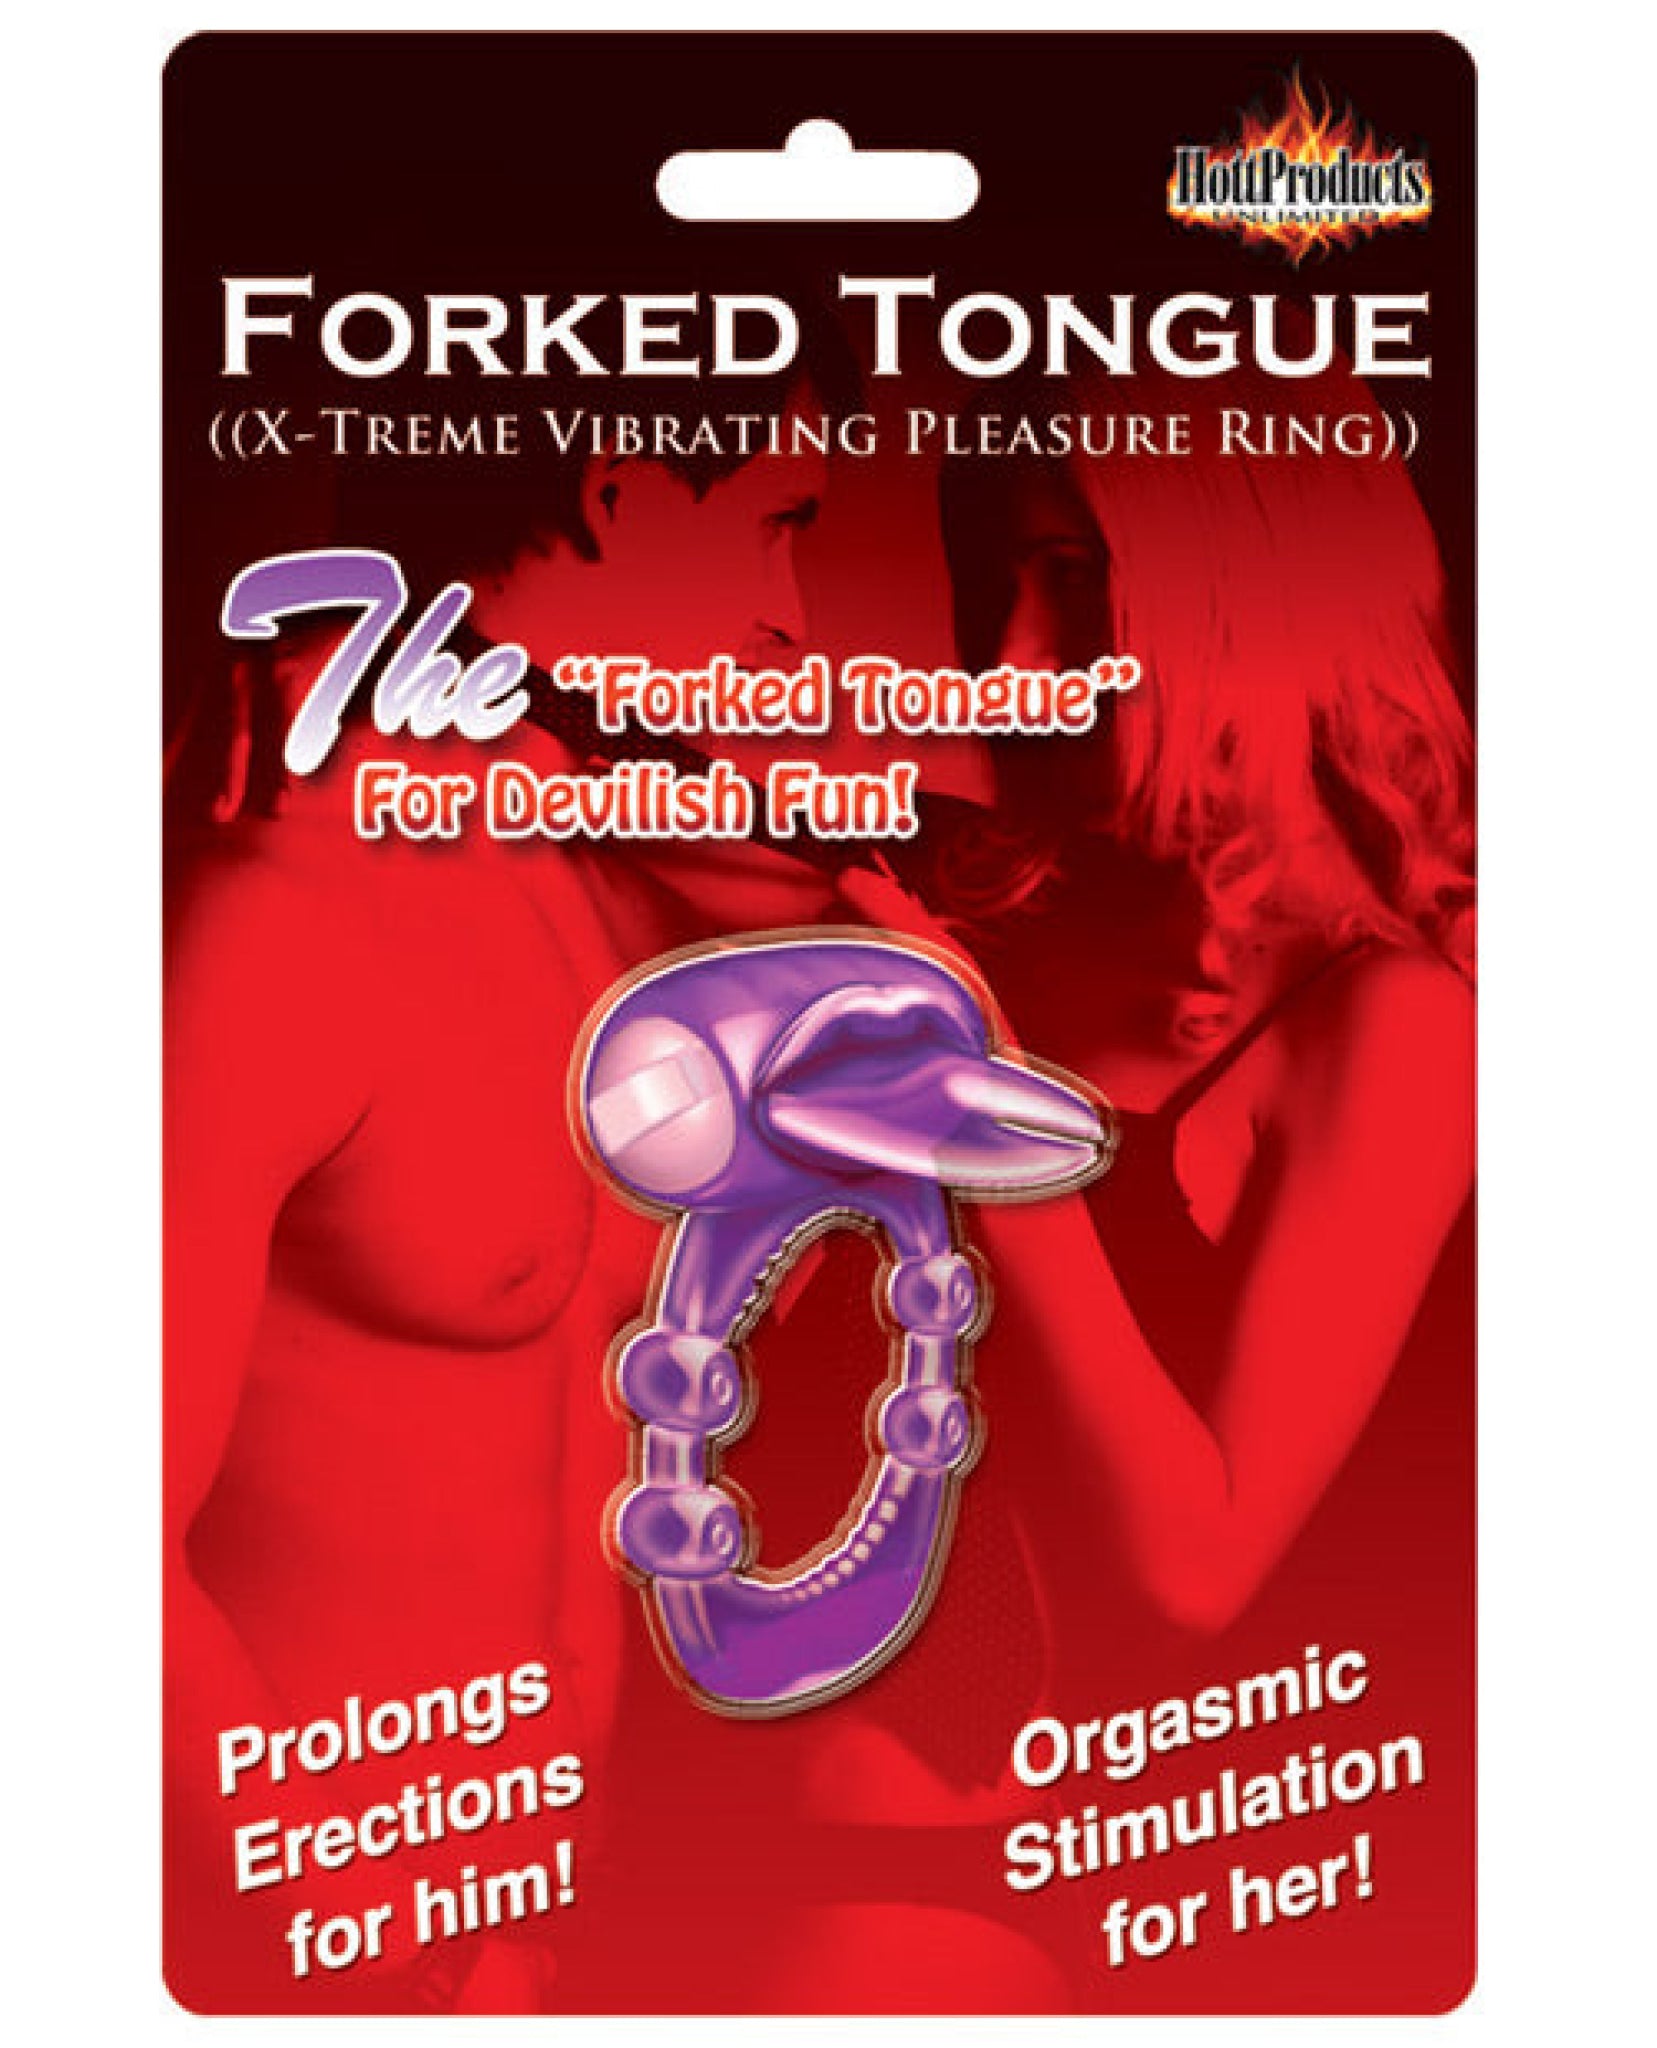 Forked Tongue X-treme Vibrating Pleasure Ring Hott Products